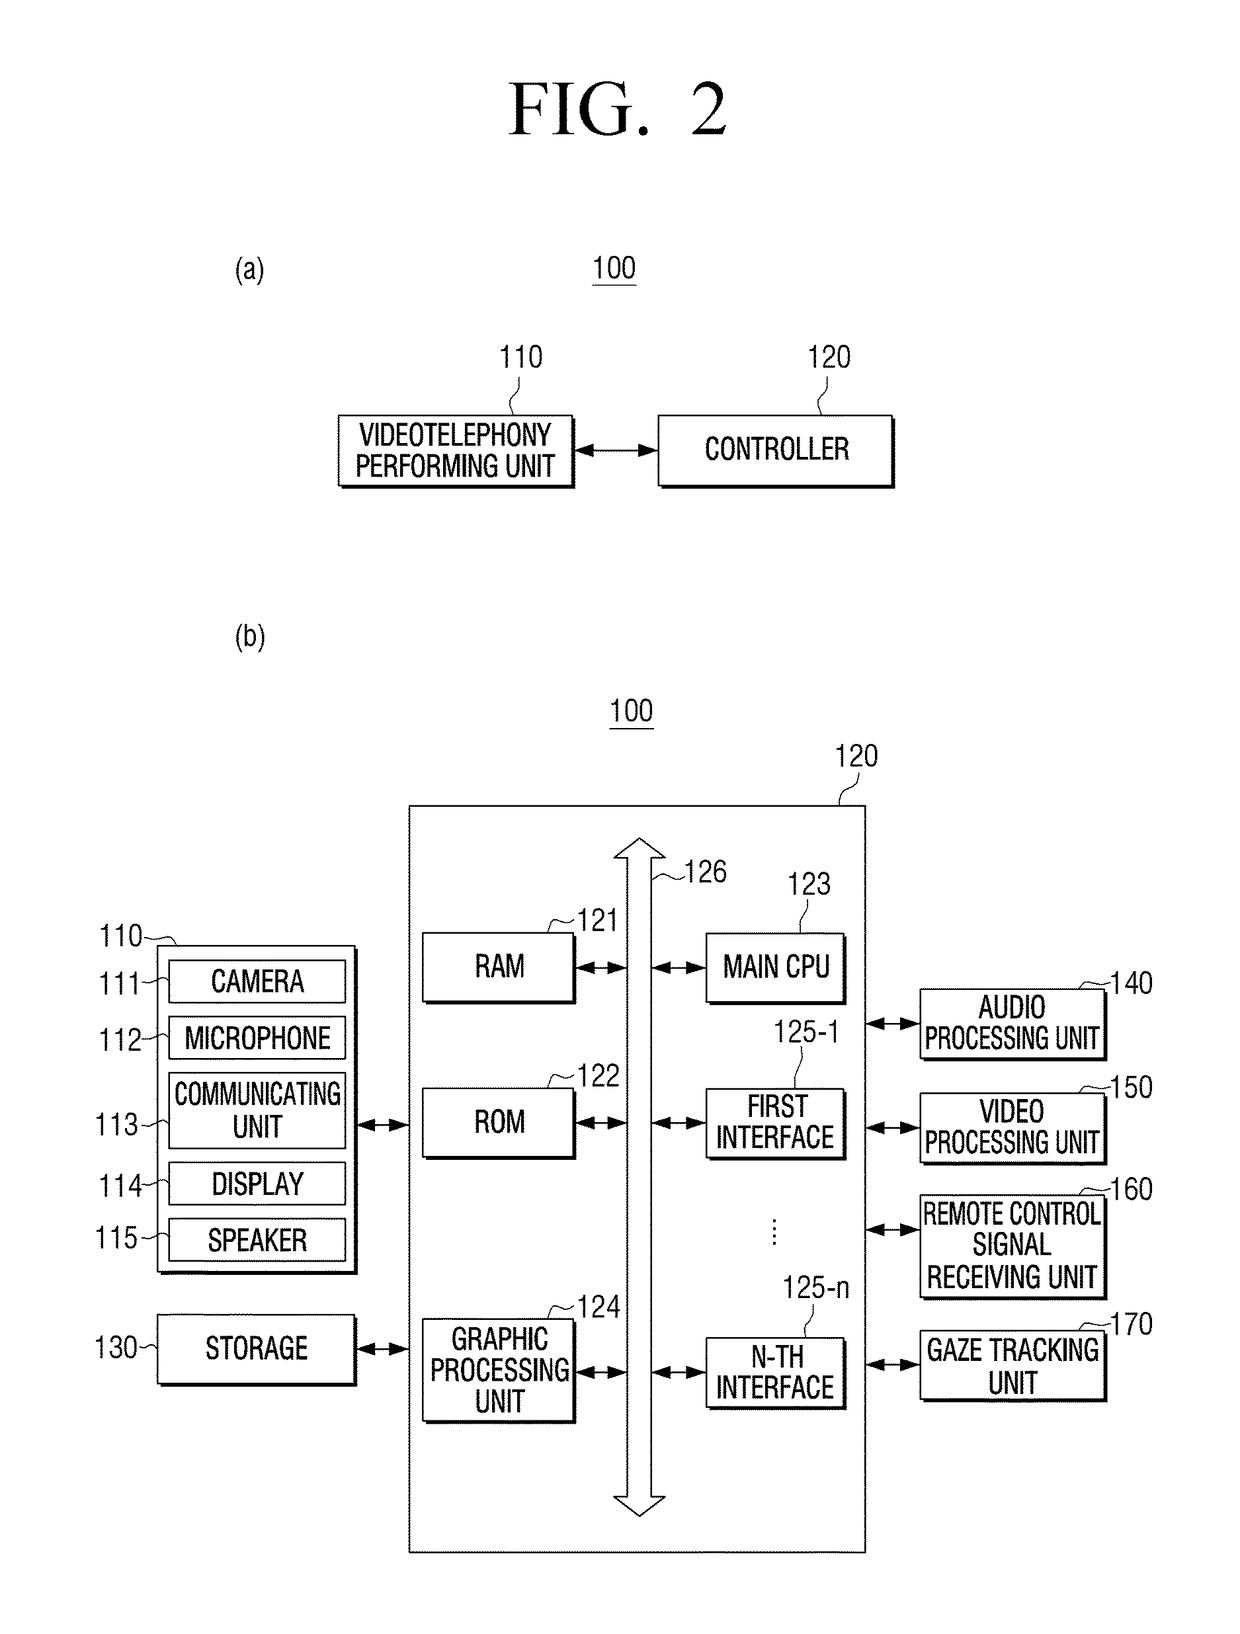 Display apparatus and method for performing videotelephony using the same